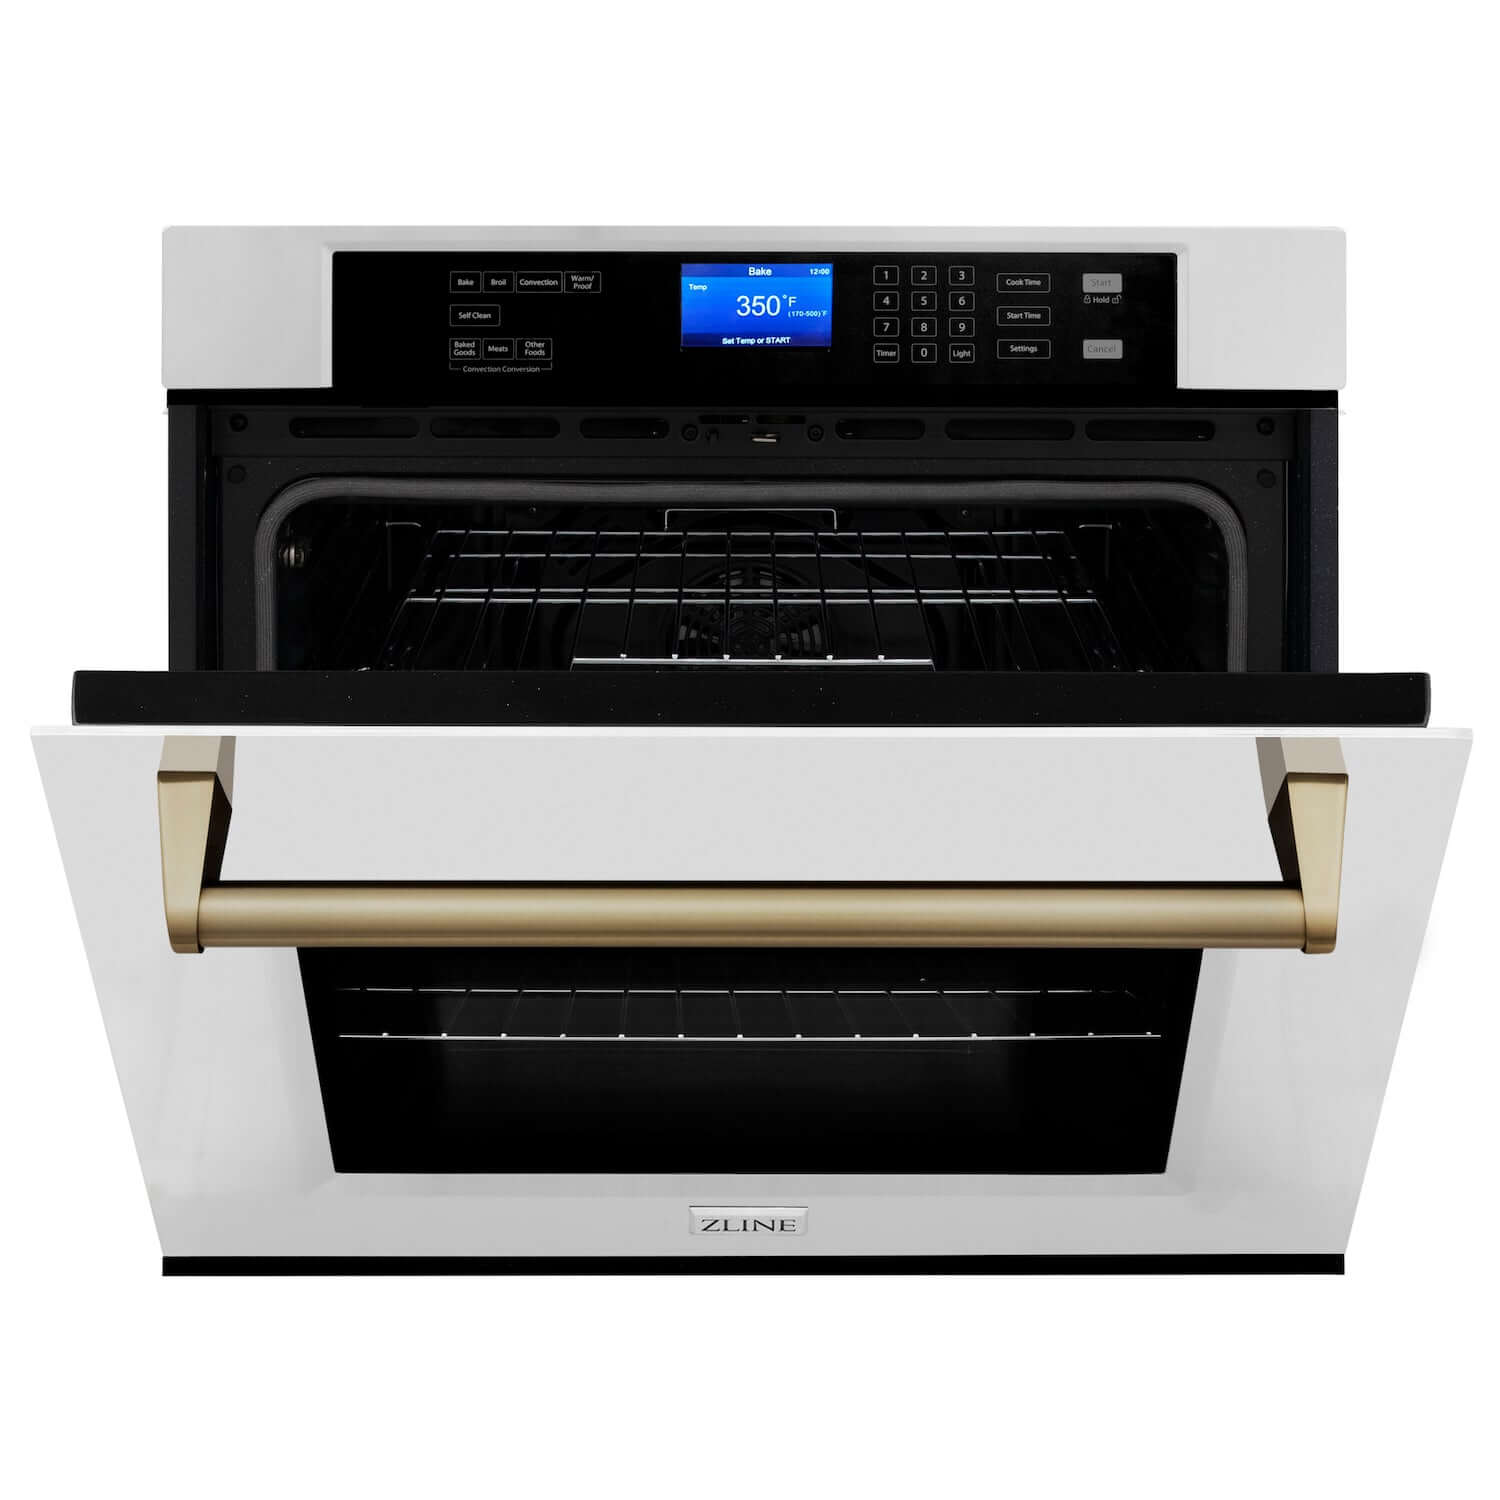 ZLINE Autograph Edition 30 in. Electric Single Wall Oven with Self Clean and True Convection in Stainless Steel and Champagne Bronze Accents (AWSZ-30-CB) front, half open.